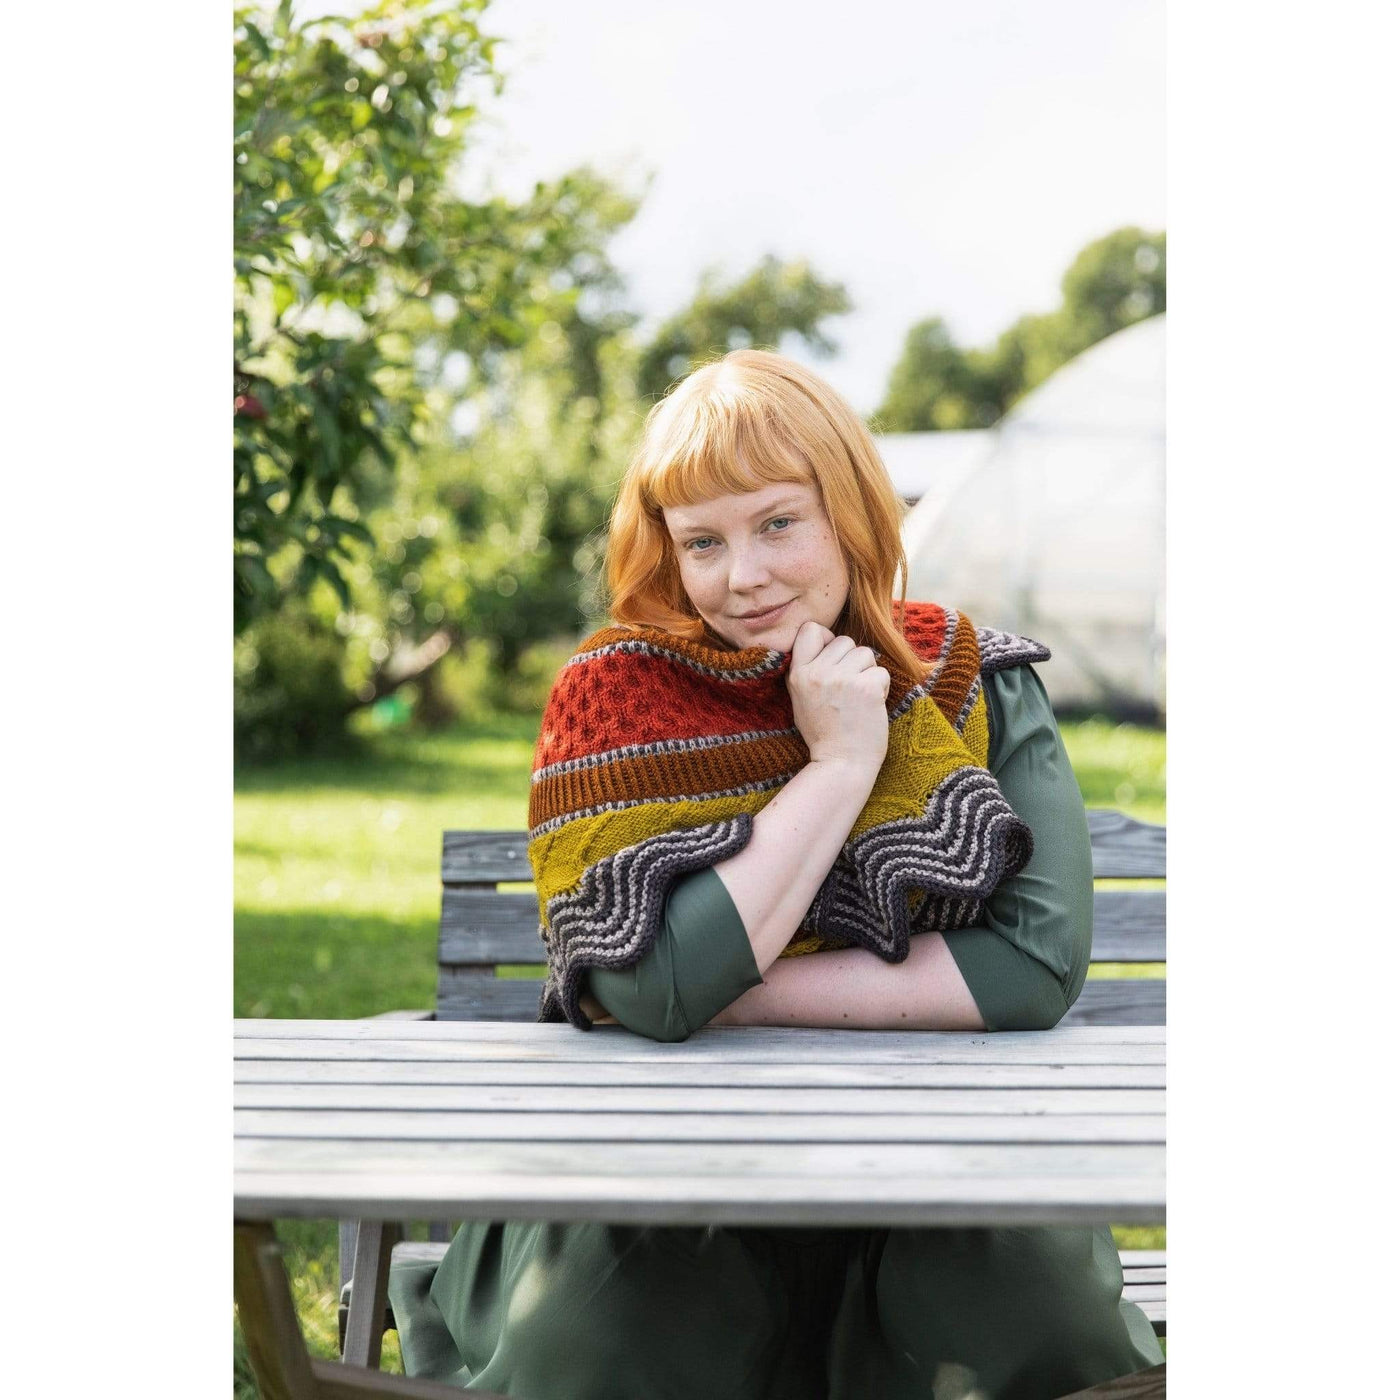 The Woolly Thistle Worsted – A Knitwear Collection Curated by Aimée Gille of La Bien Aimée published by Laine woman wearing  red, brown, yellow, and black and white striped shawl